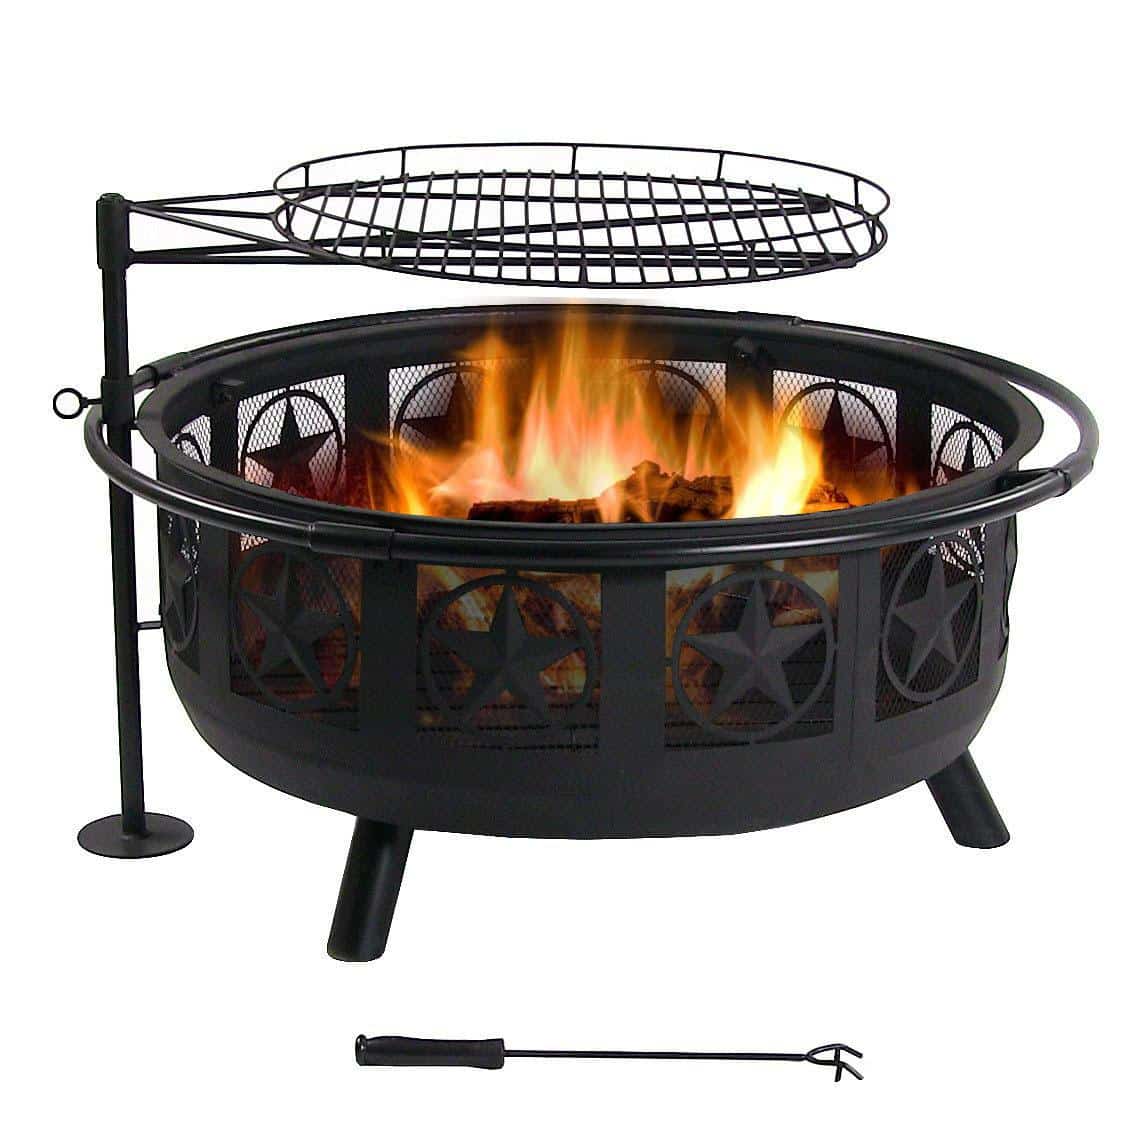 Sunnydaze Black All Star Fire Pit with Cooking Grate, 30 Inch Diameter ...